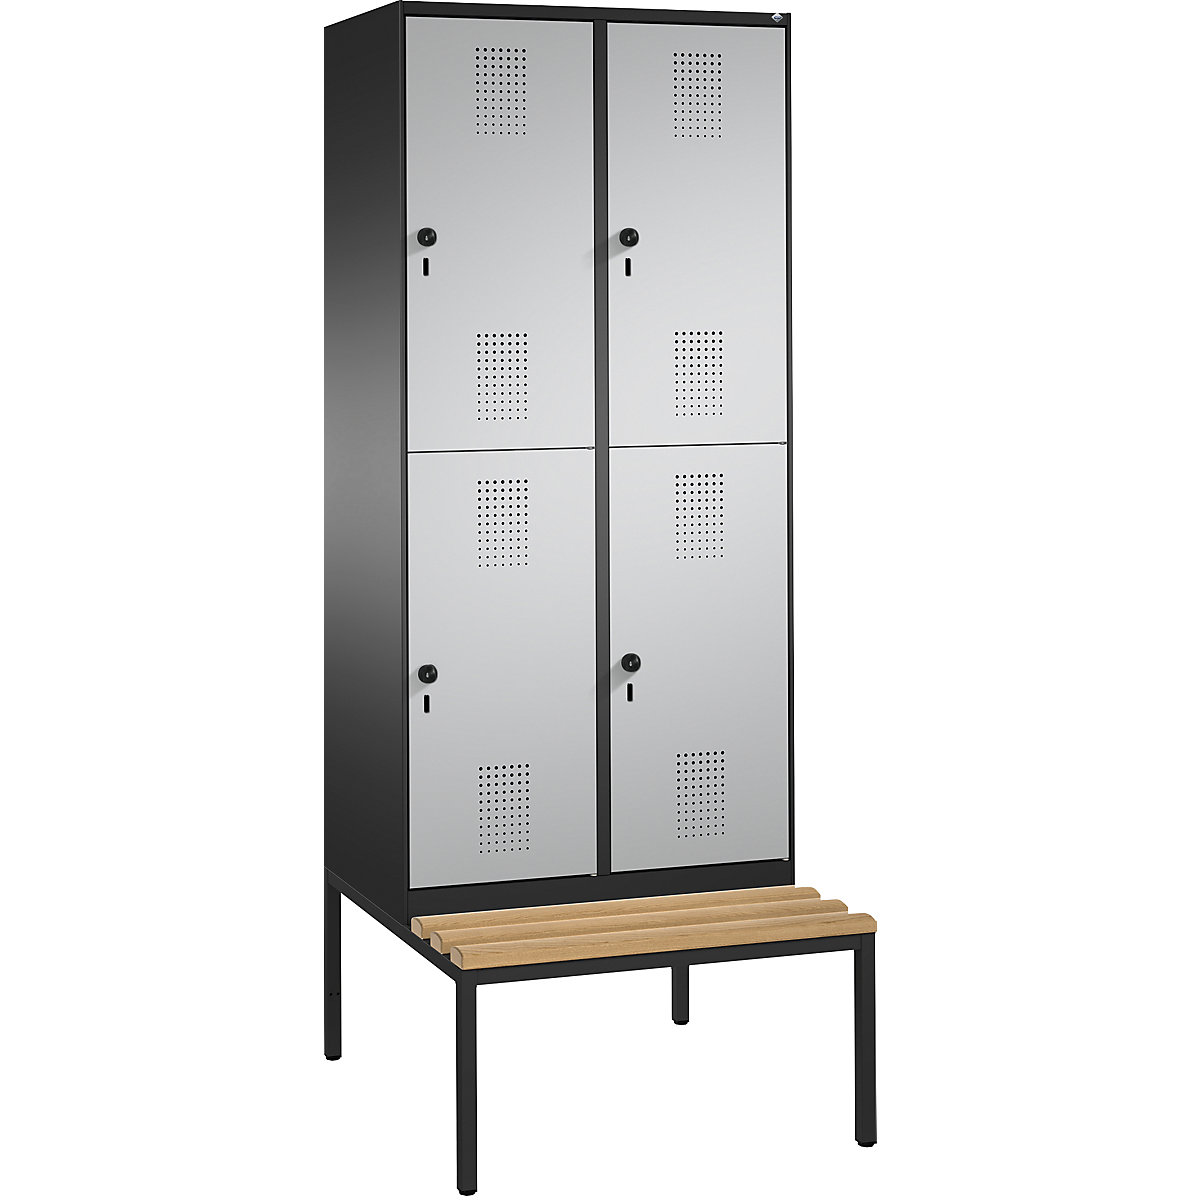 EVOLO cloakroom locker, double tier, with bench – C+P, 2 compartments, 2 shelf compartments each, compartment width 400 mm, black grey / white aluminium-17